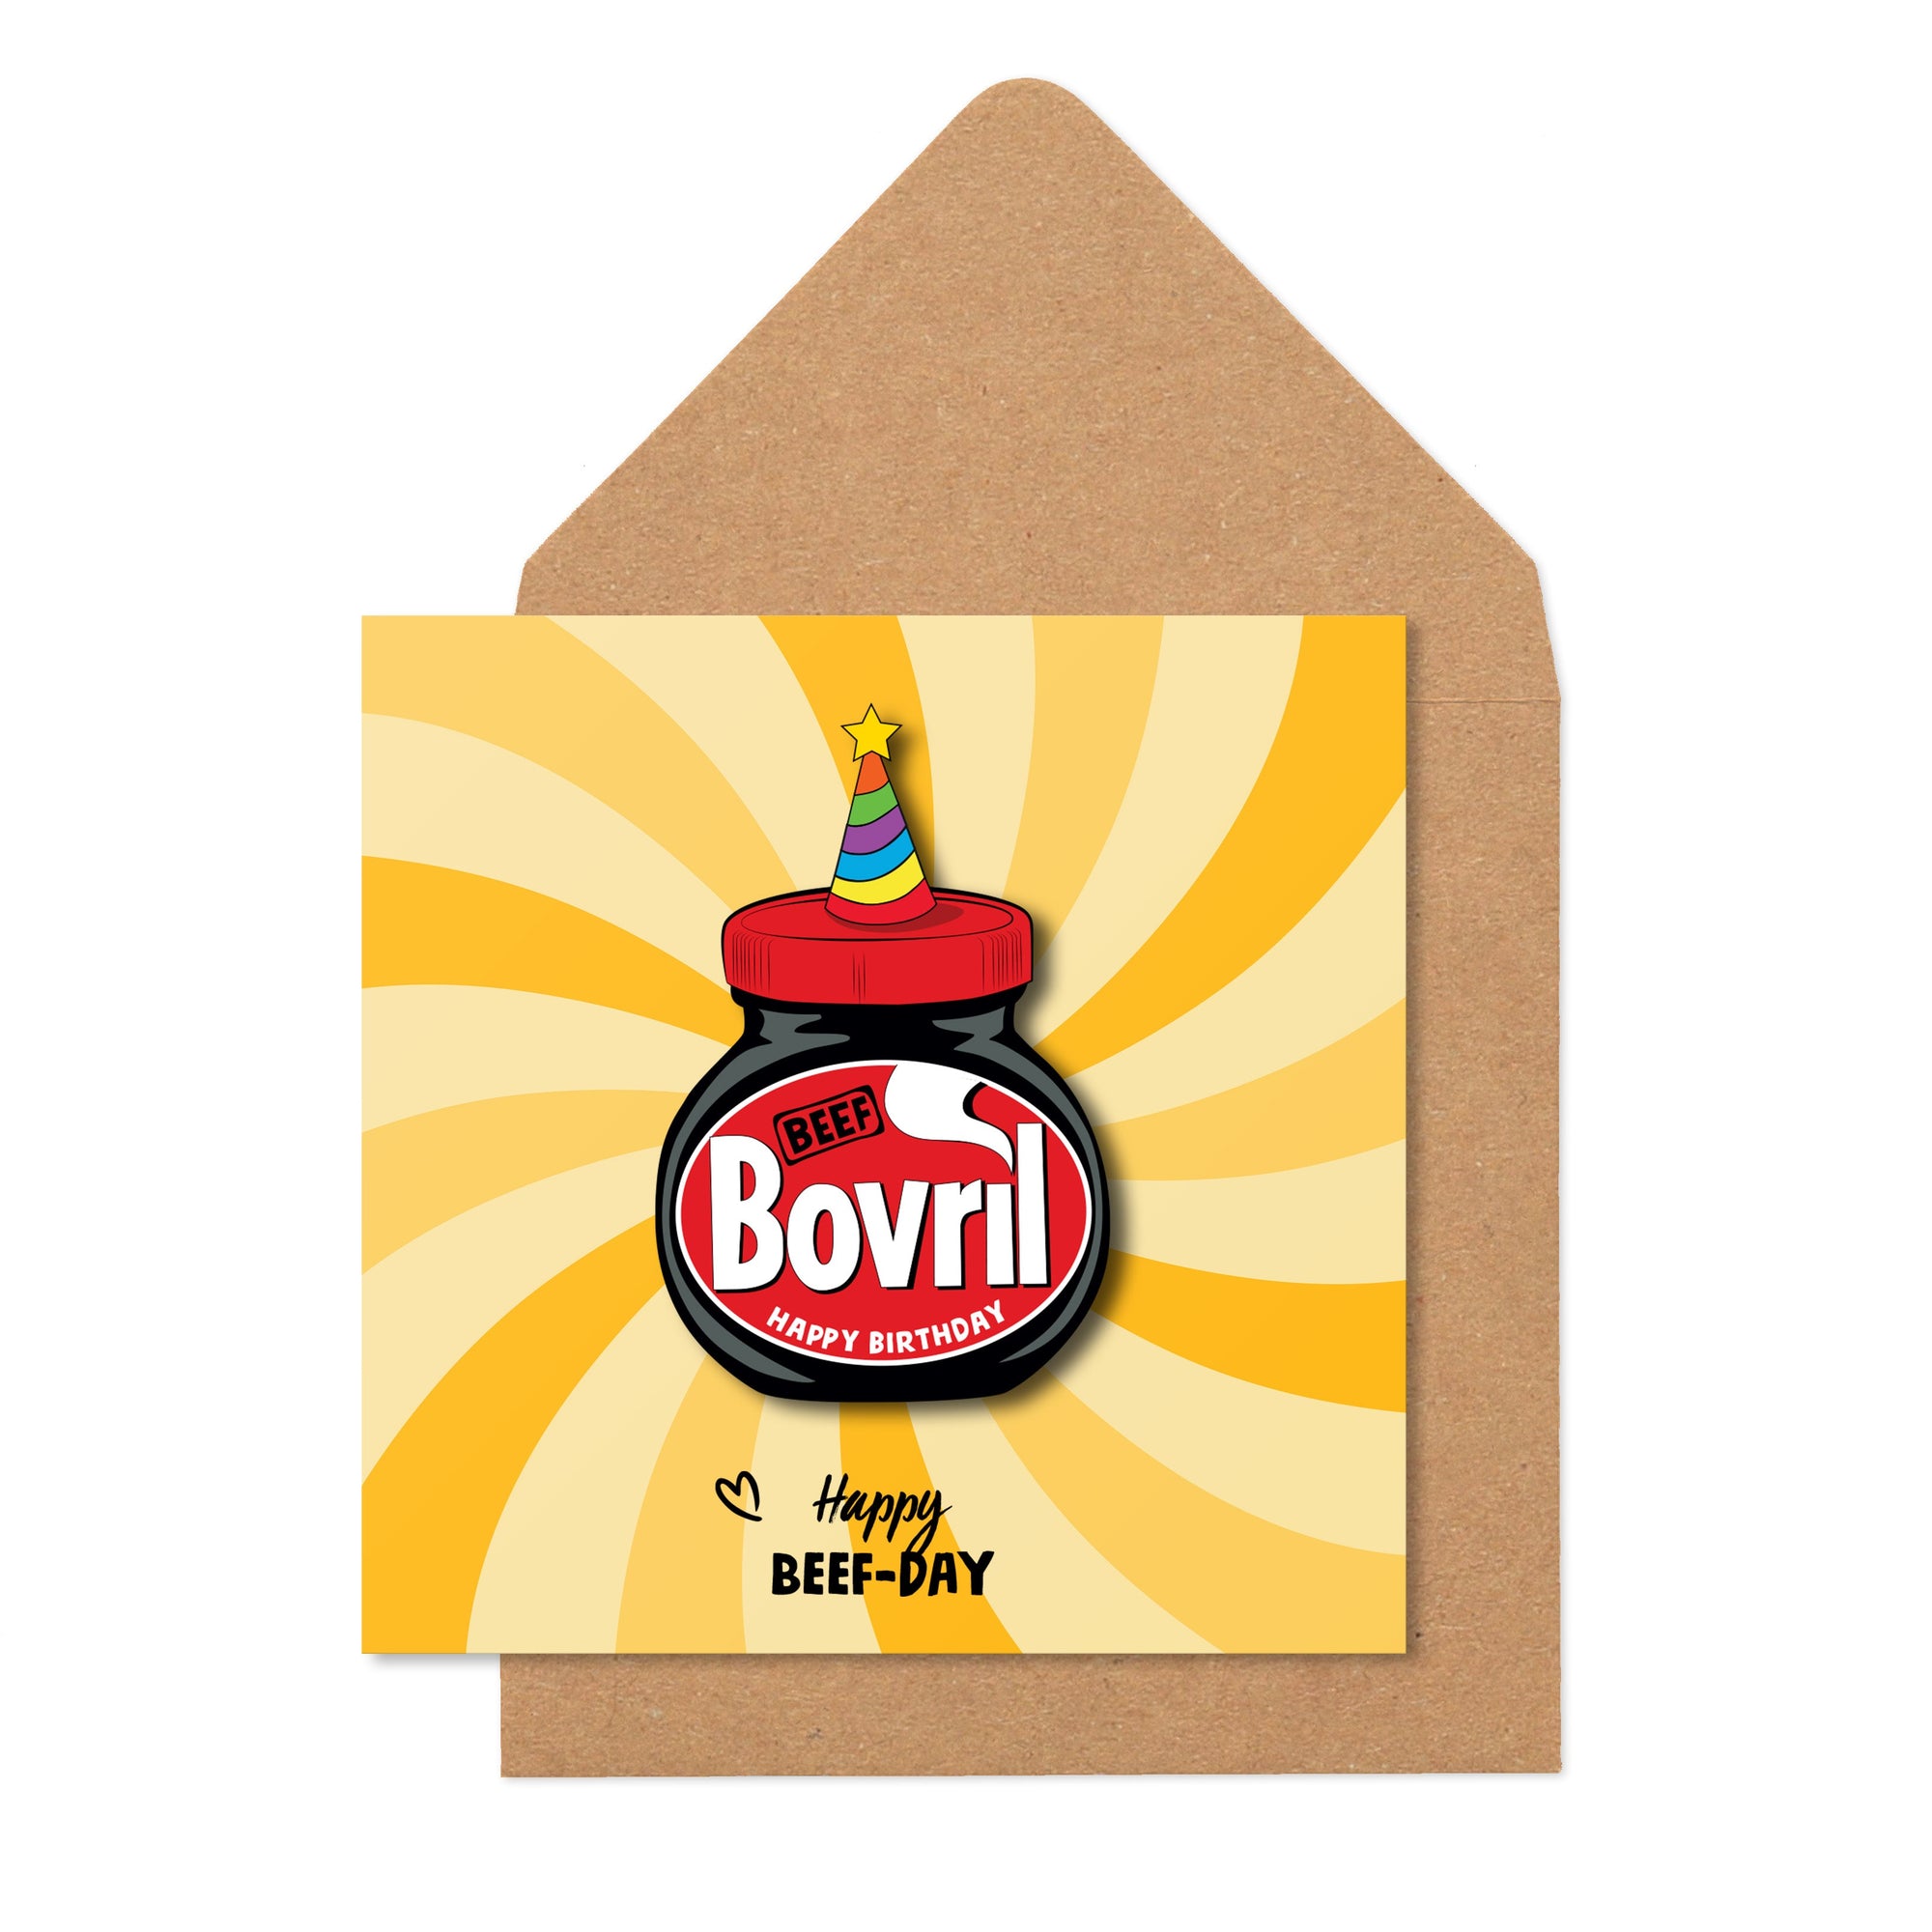 Happy Beef-day' Bovril